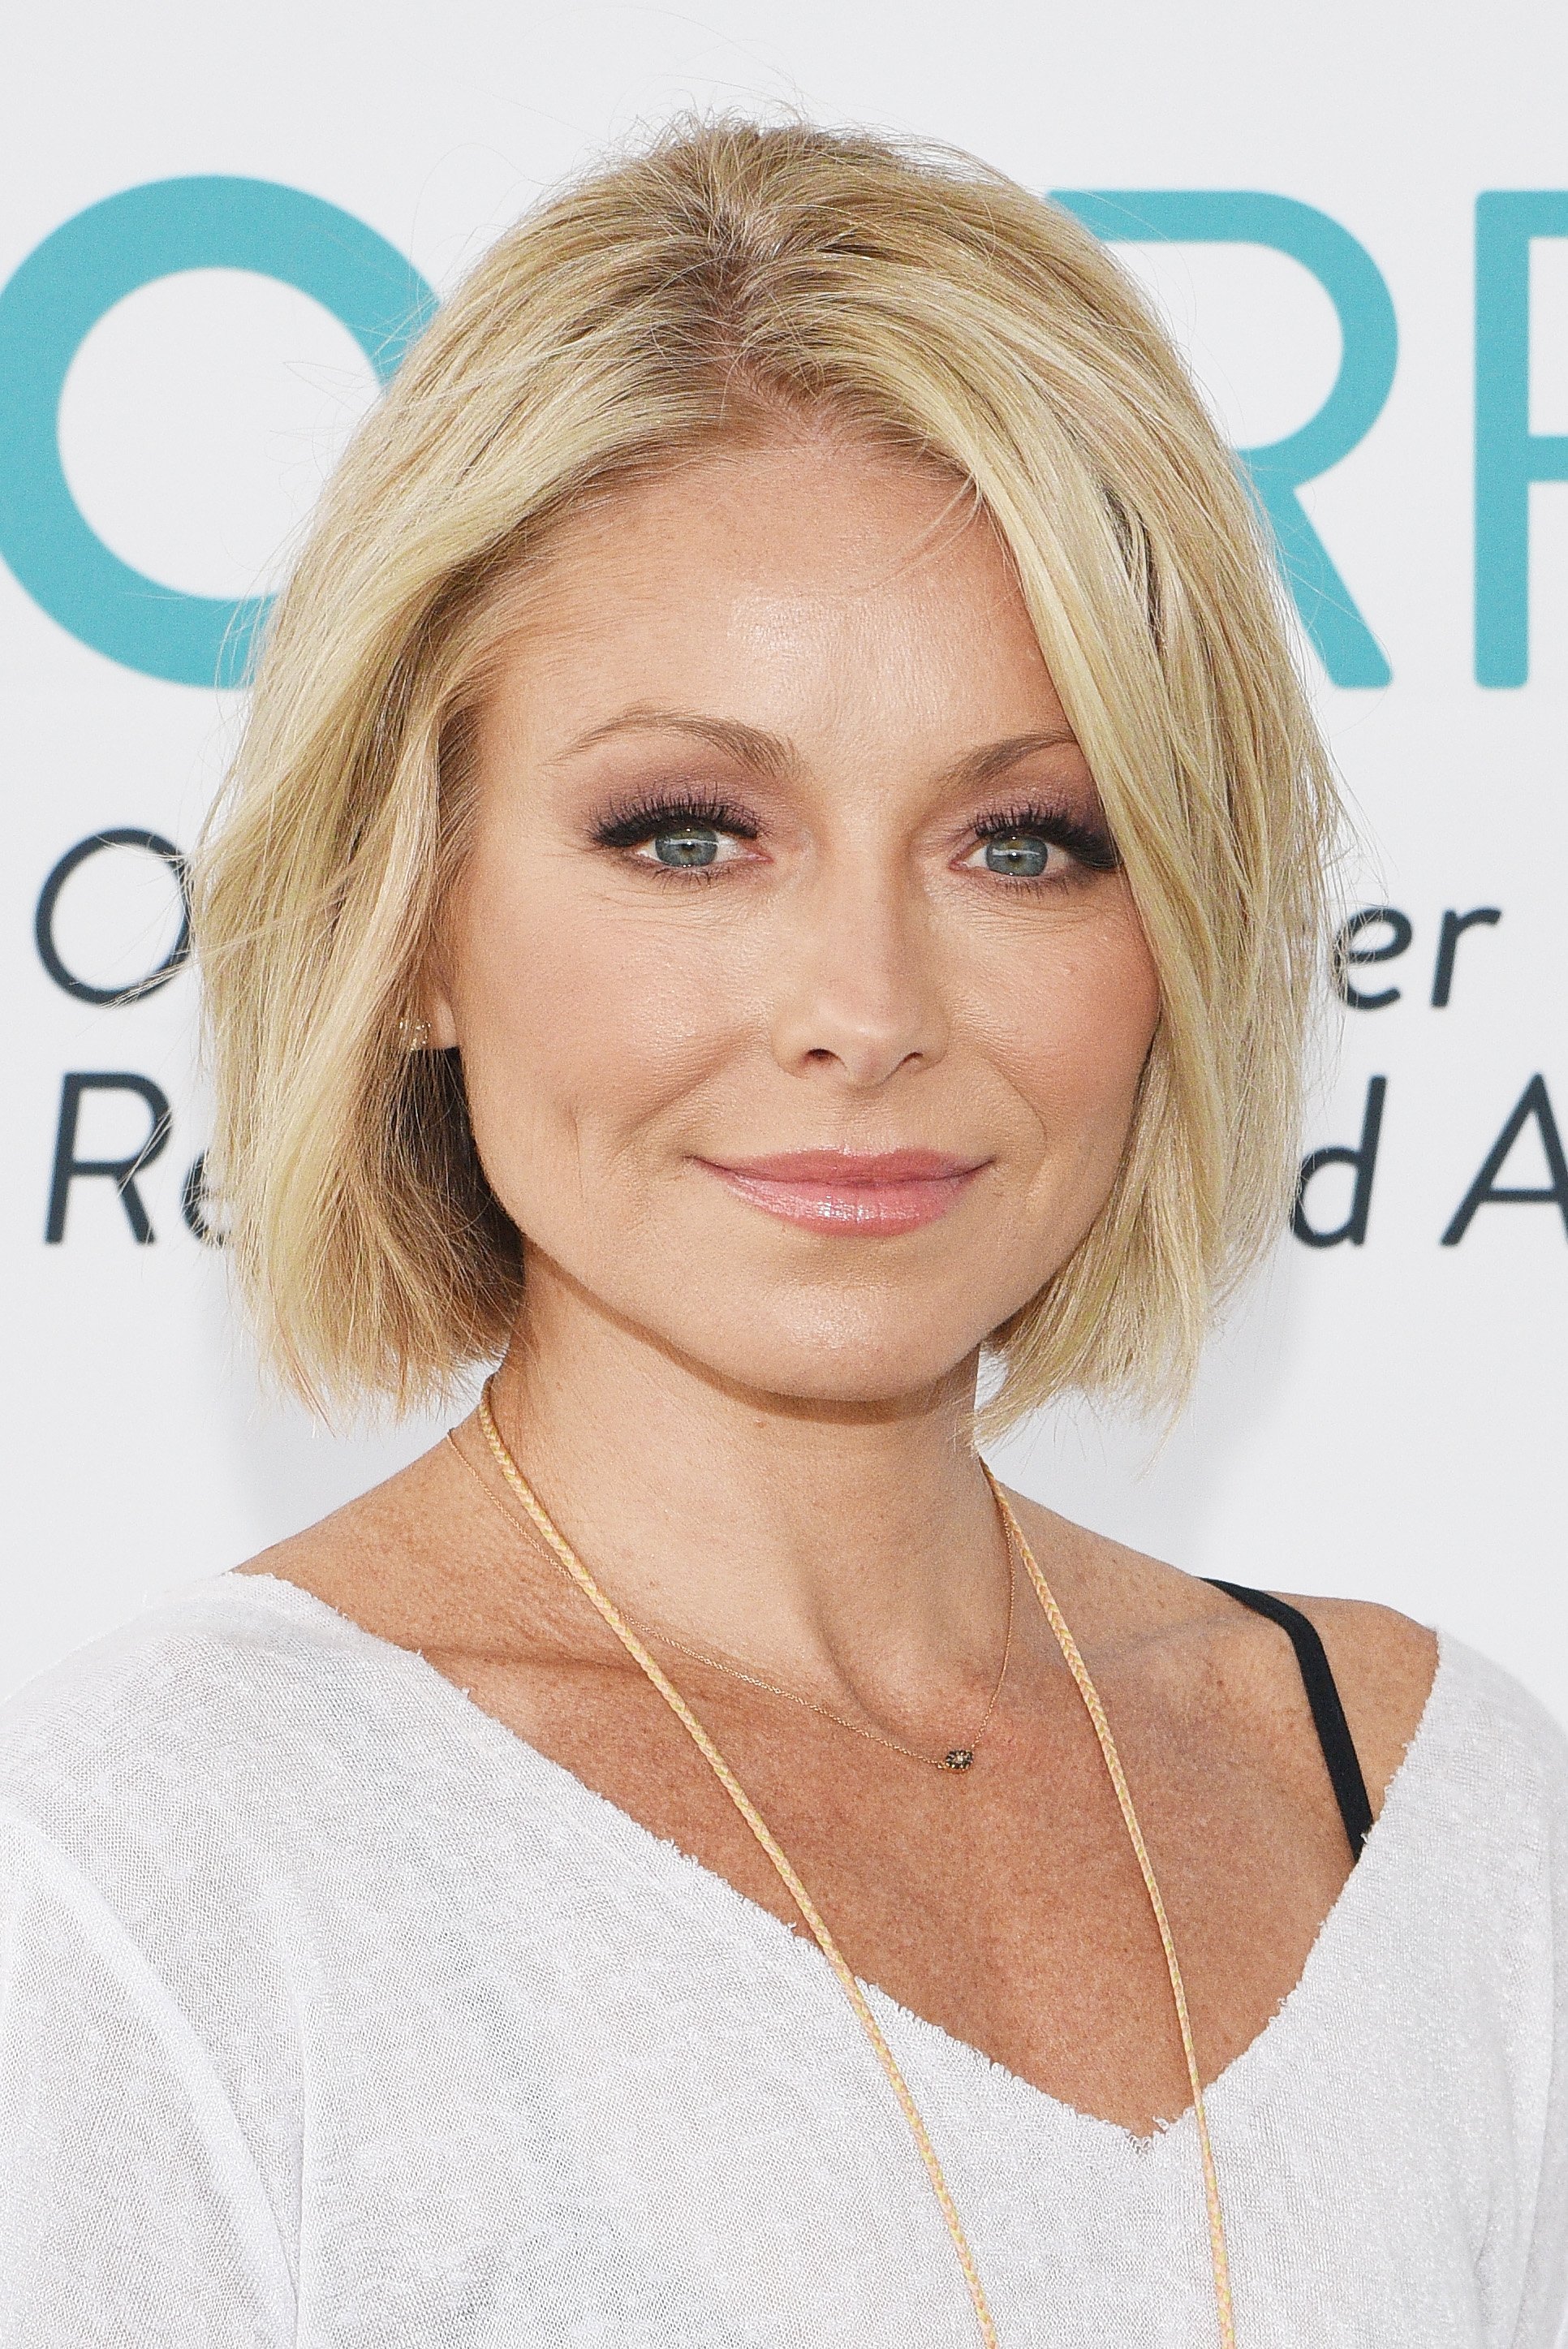 Kelly Ripa at OCRFA's 20th Annual Super Saturday to Benefit Ovarian Cancer in Watermill, New York | Photo: Getty Images